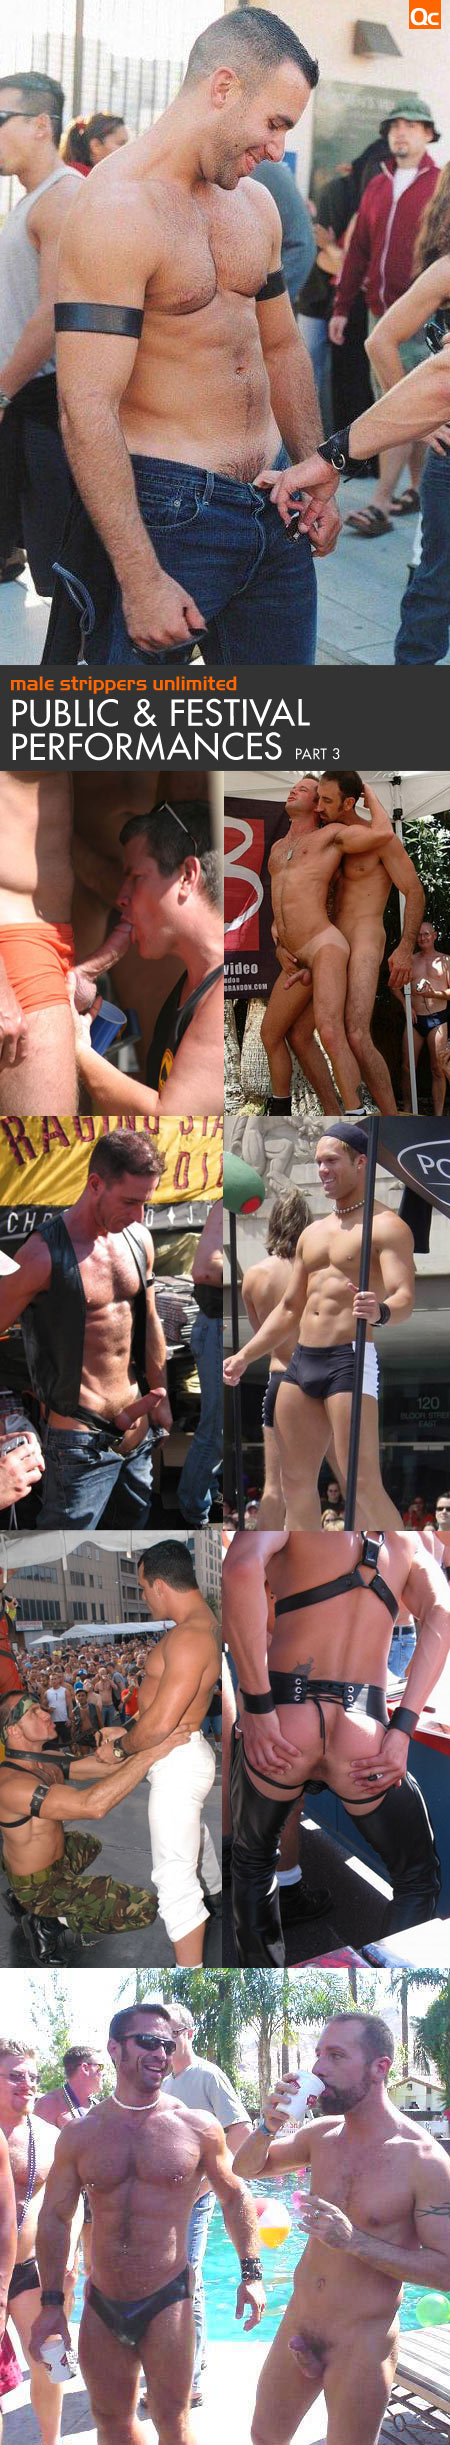 Naked Guys in Public!